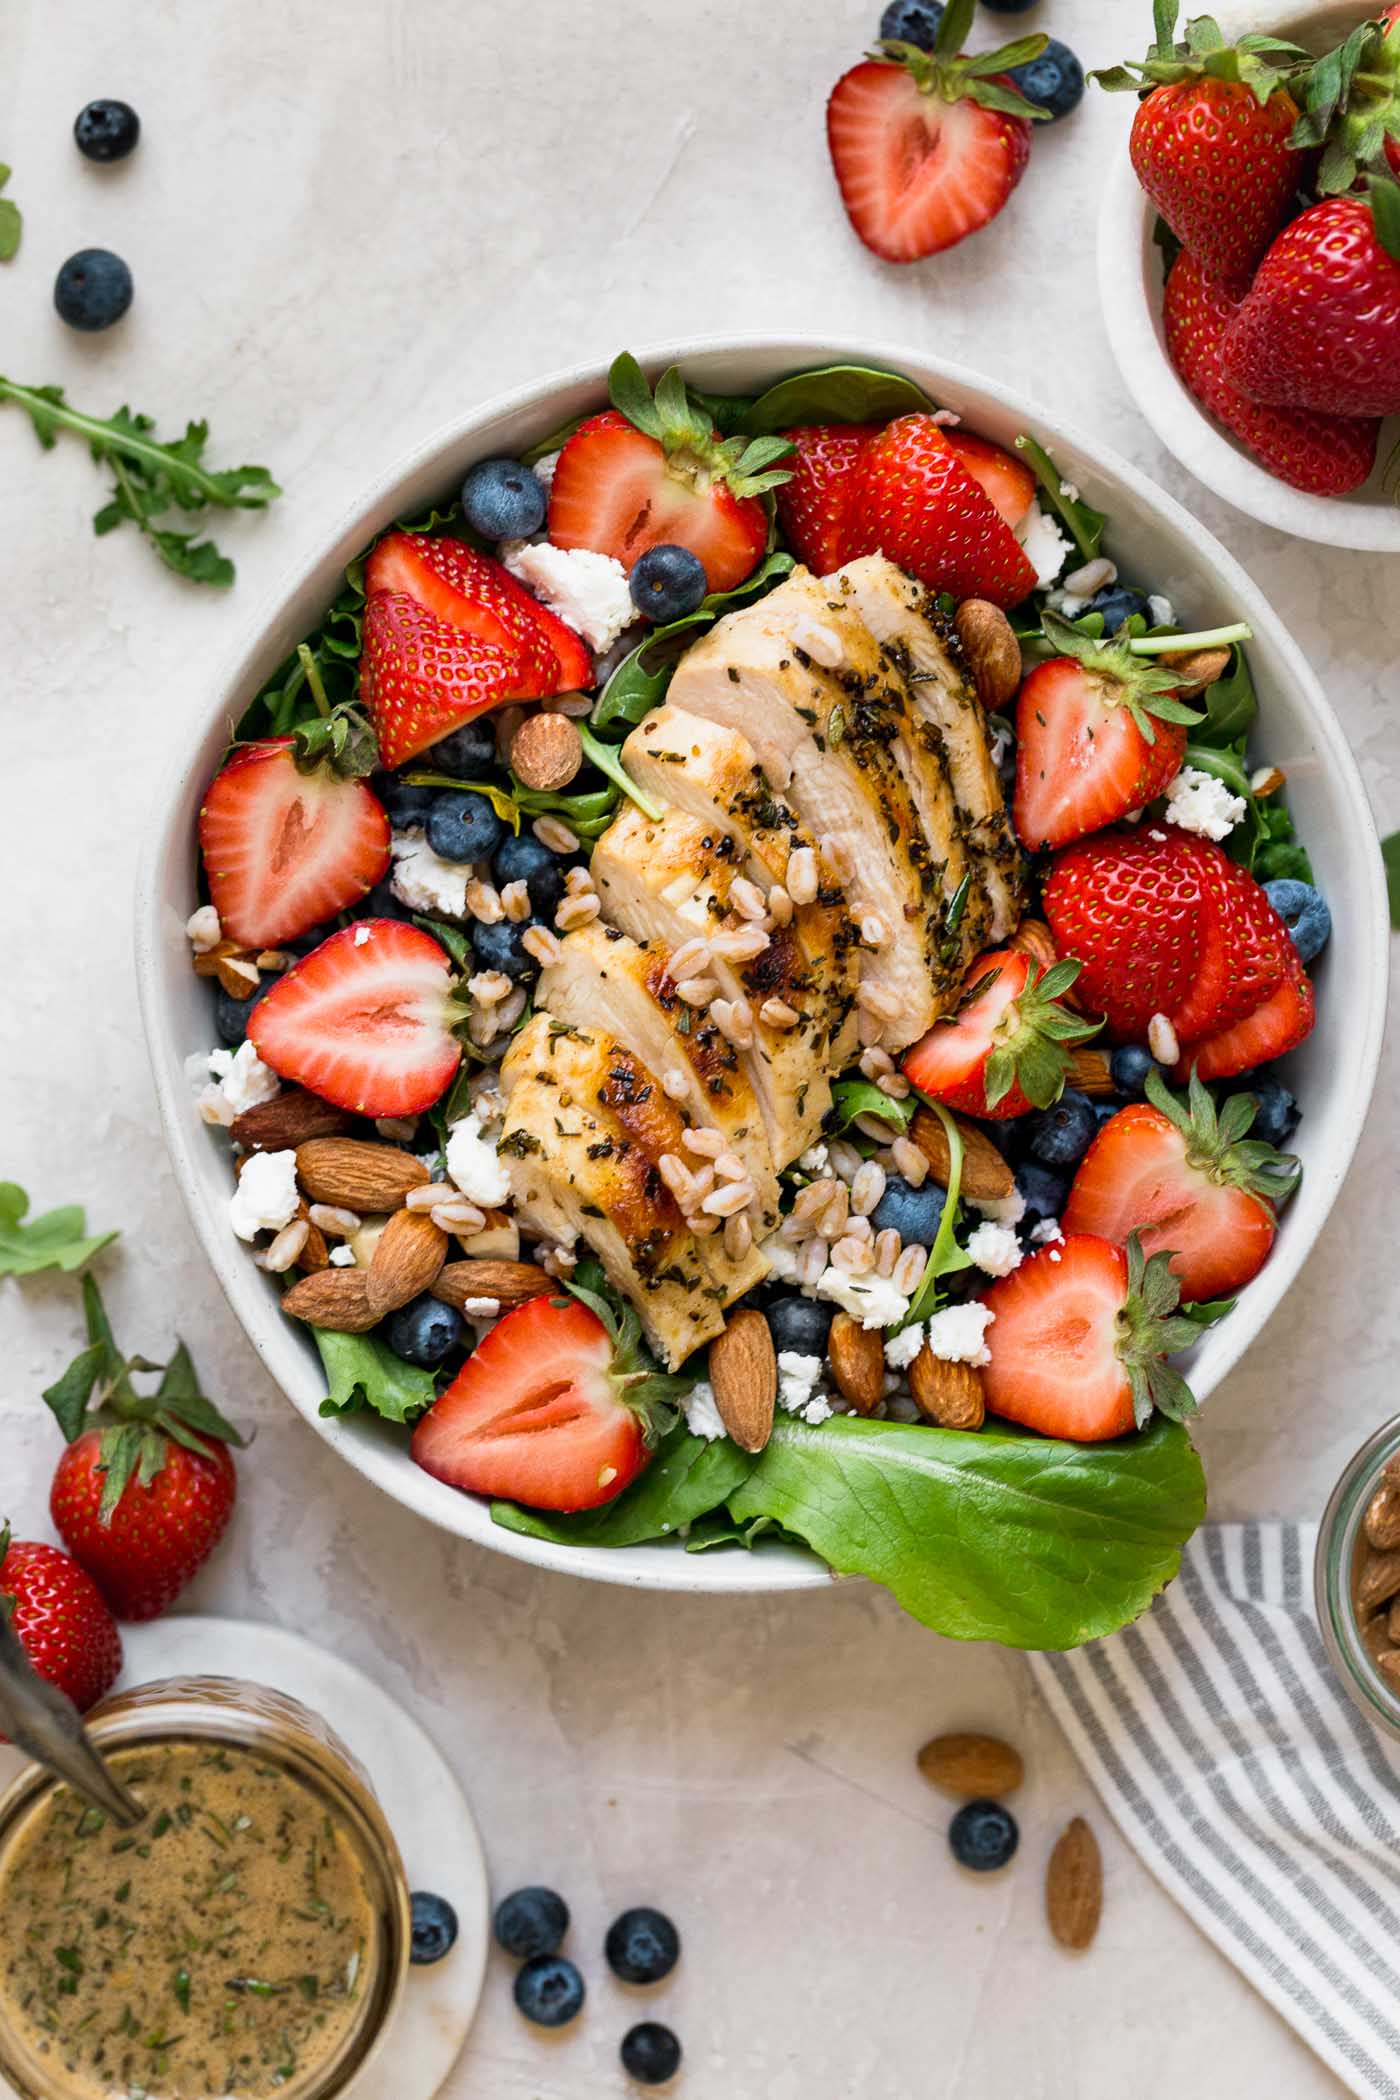 an easy & healthy strawberry salad just in time for spring!!! this strawberry salad is loaded with sweet strawberries & blueberries, tangy goat cheese, chopped almonds, farro, and gets topped with simple grilled chicken breast and drizzles of the most amazing homemade maple balsamic vinaigrette. the perfect healthy salad for meal prep, an easy weeknight dinner, or for summer entertaining! #playswellwithbutter #saladrecipe #strawberrysalad #healthyrecipe #lowcarbrecipe #balsamicvinaigrette